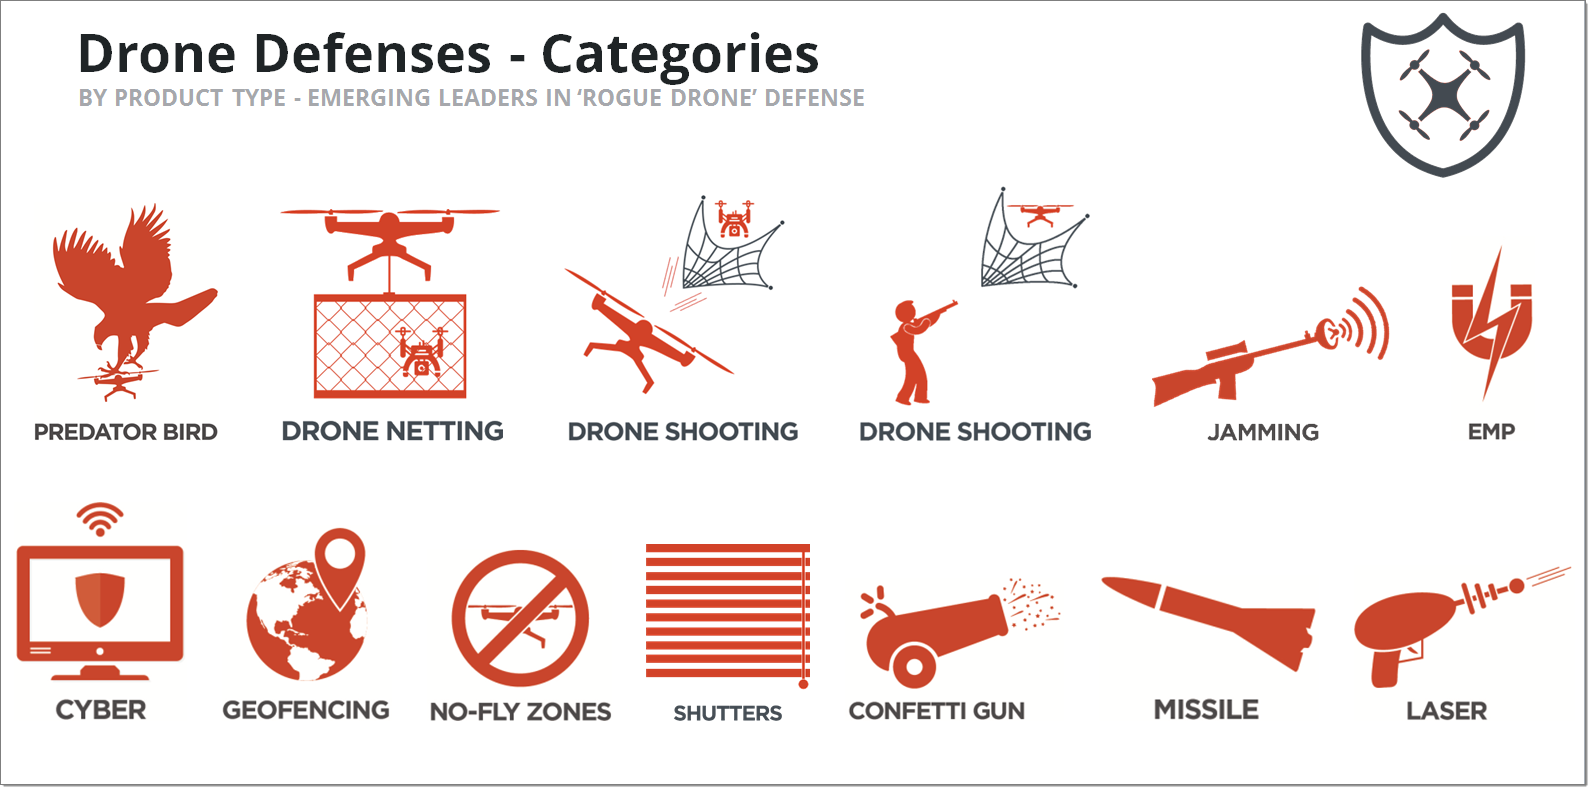 Drone Defenses - Categories - ICONS